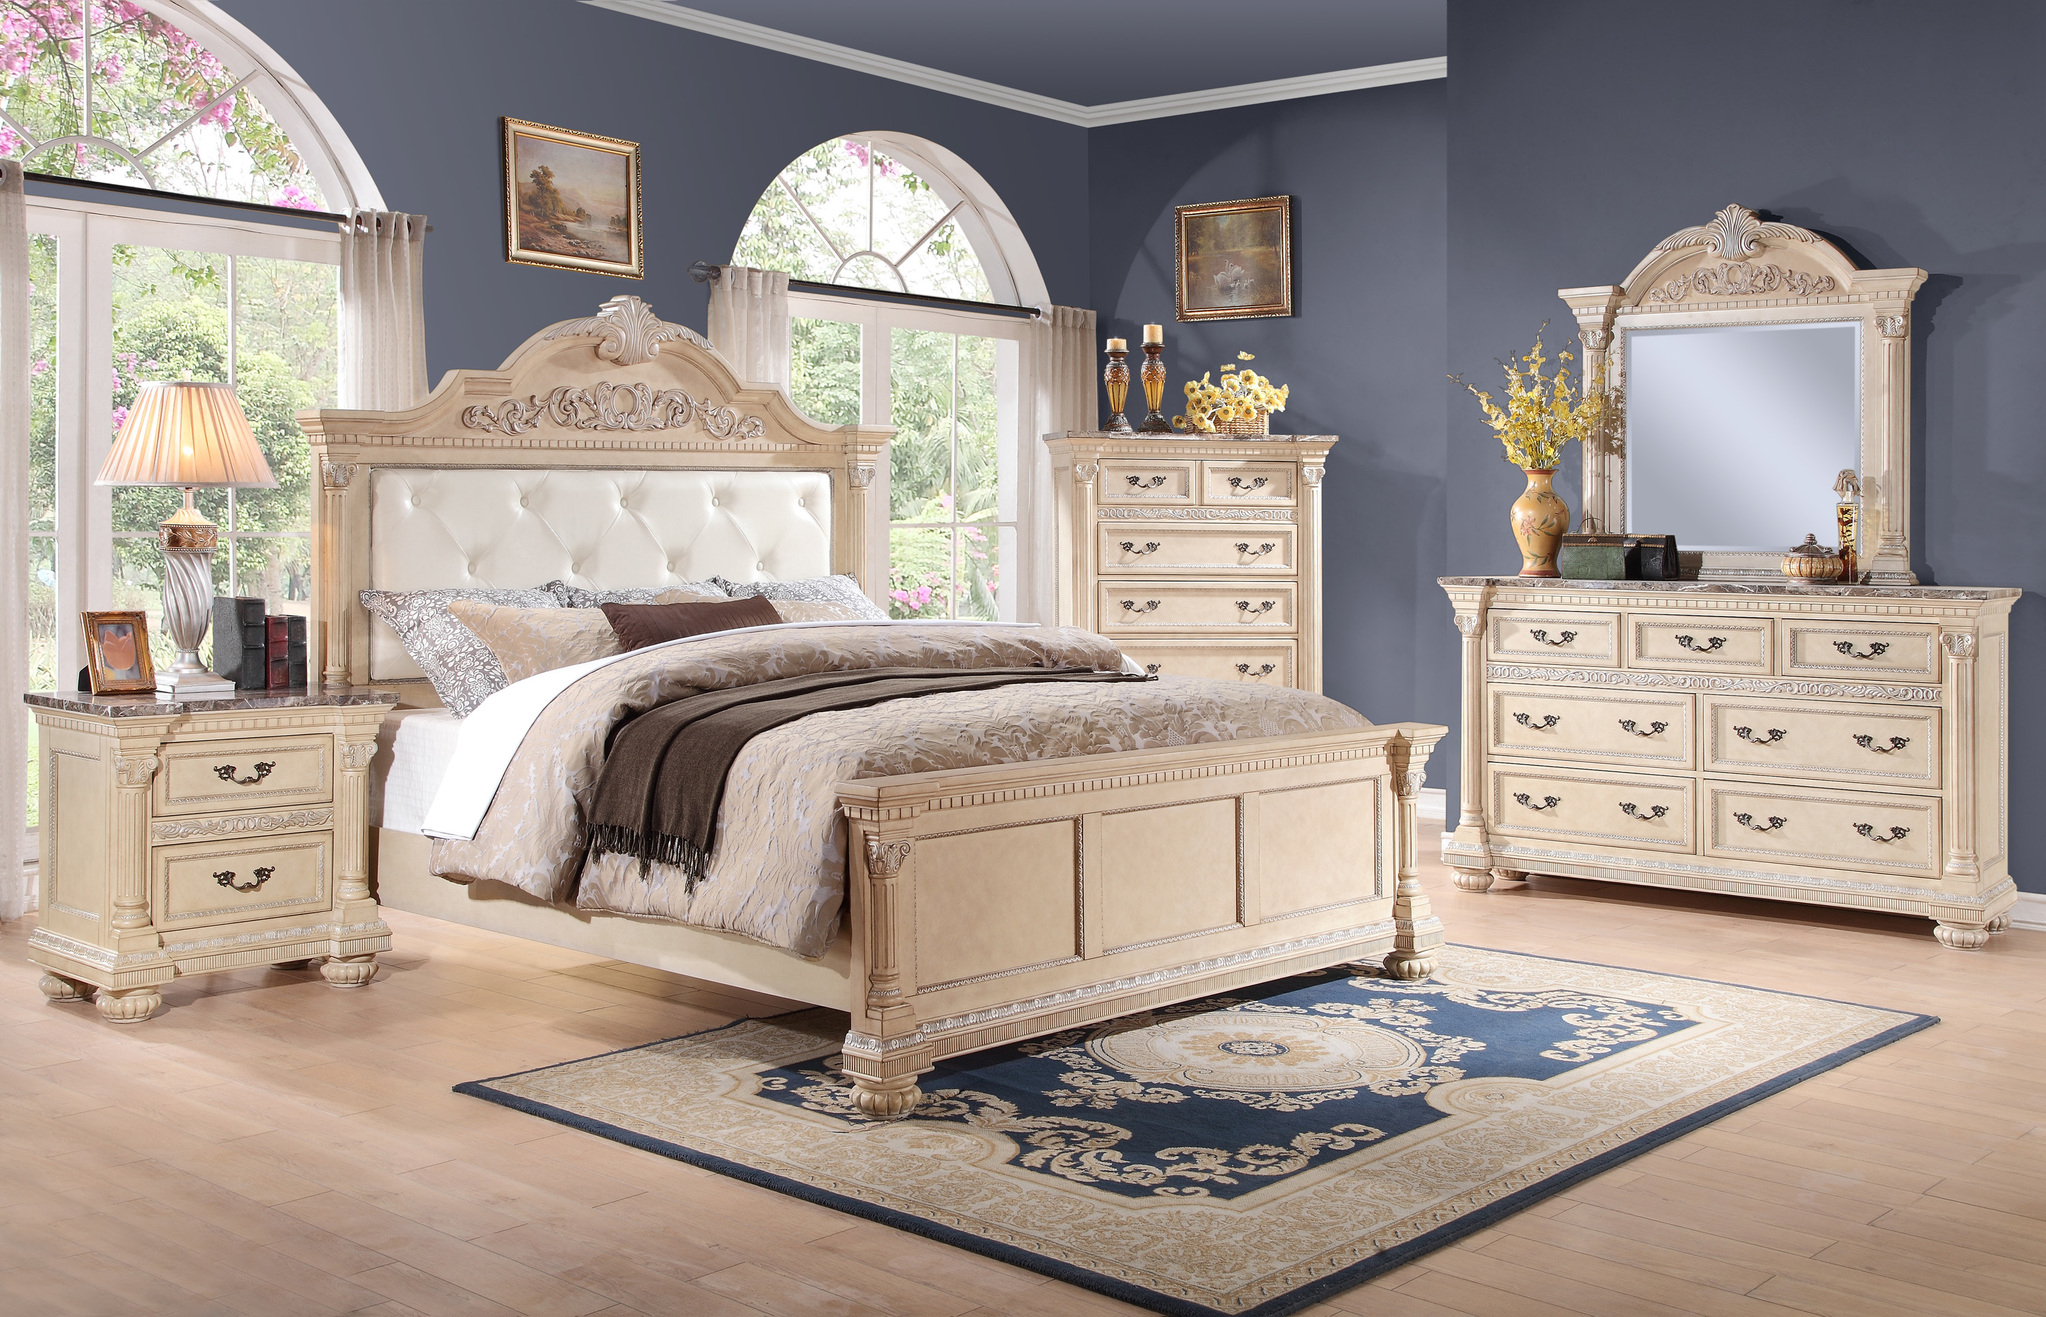 The Russian Hill Whitewash Bedroom Collection Bedroom Furniture pertaining to dimensions 2046 X 1317